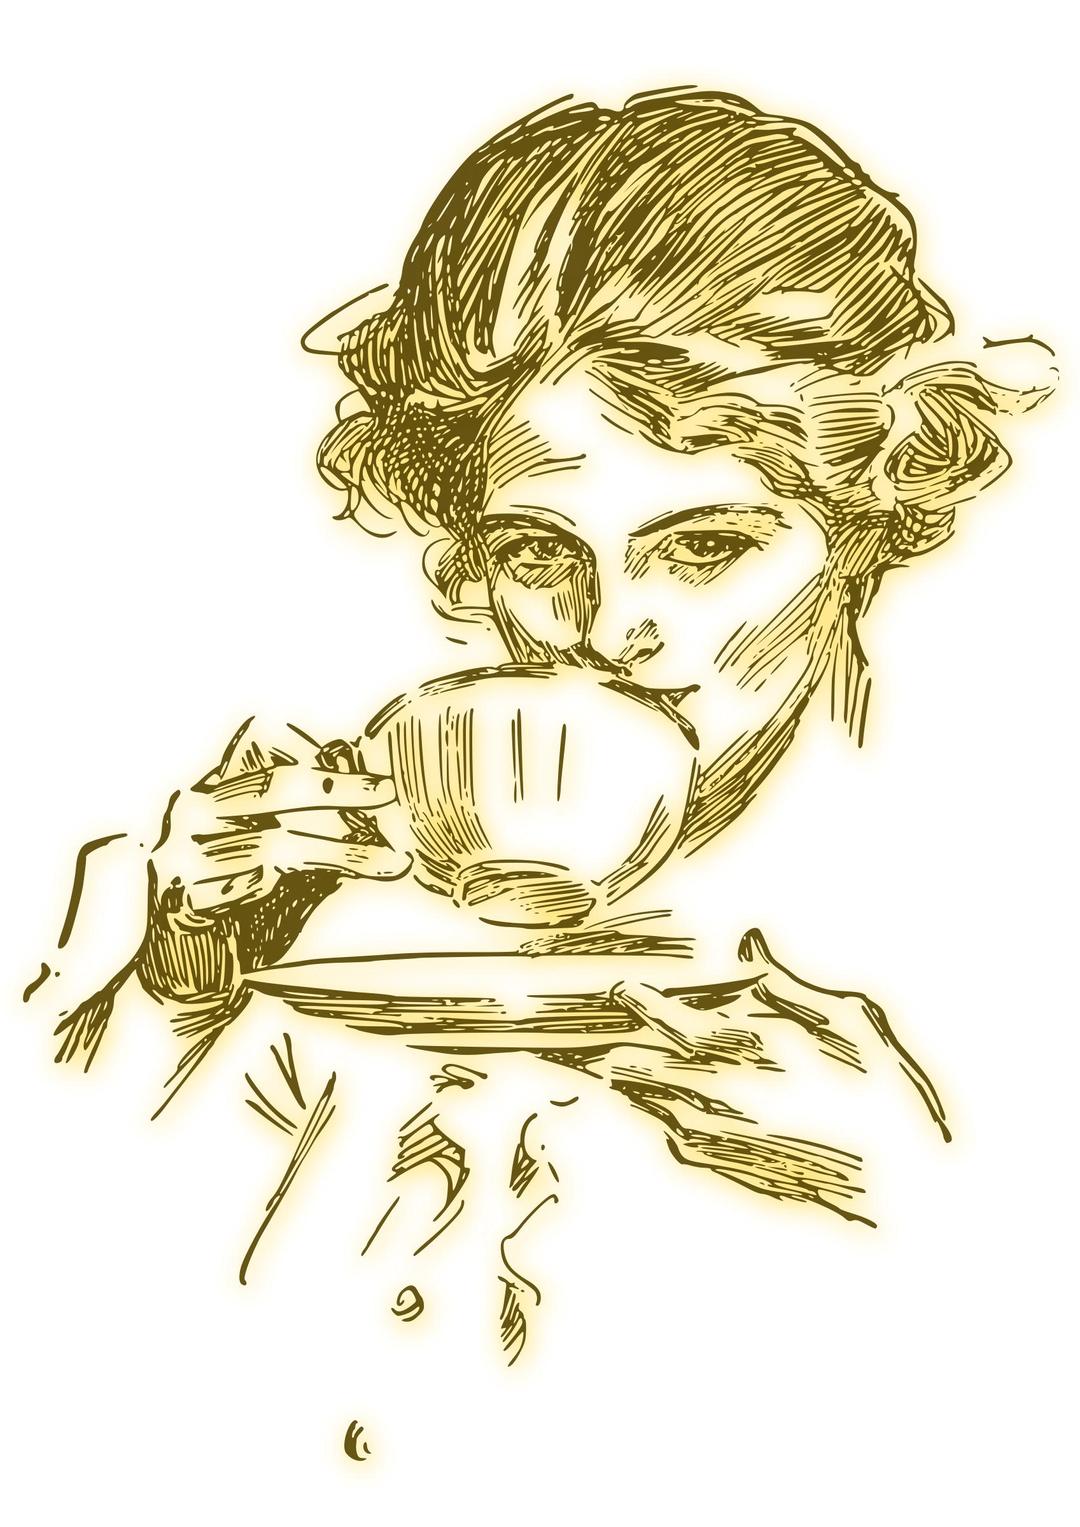 Woman drinking coffee or tea 04 - blur png transparent